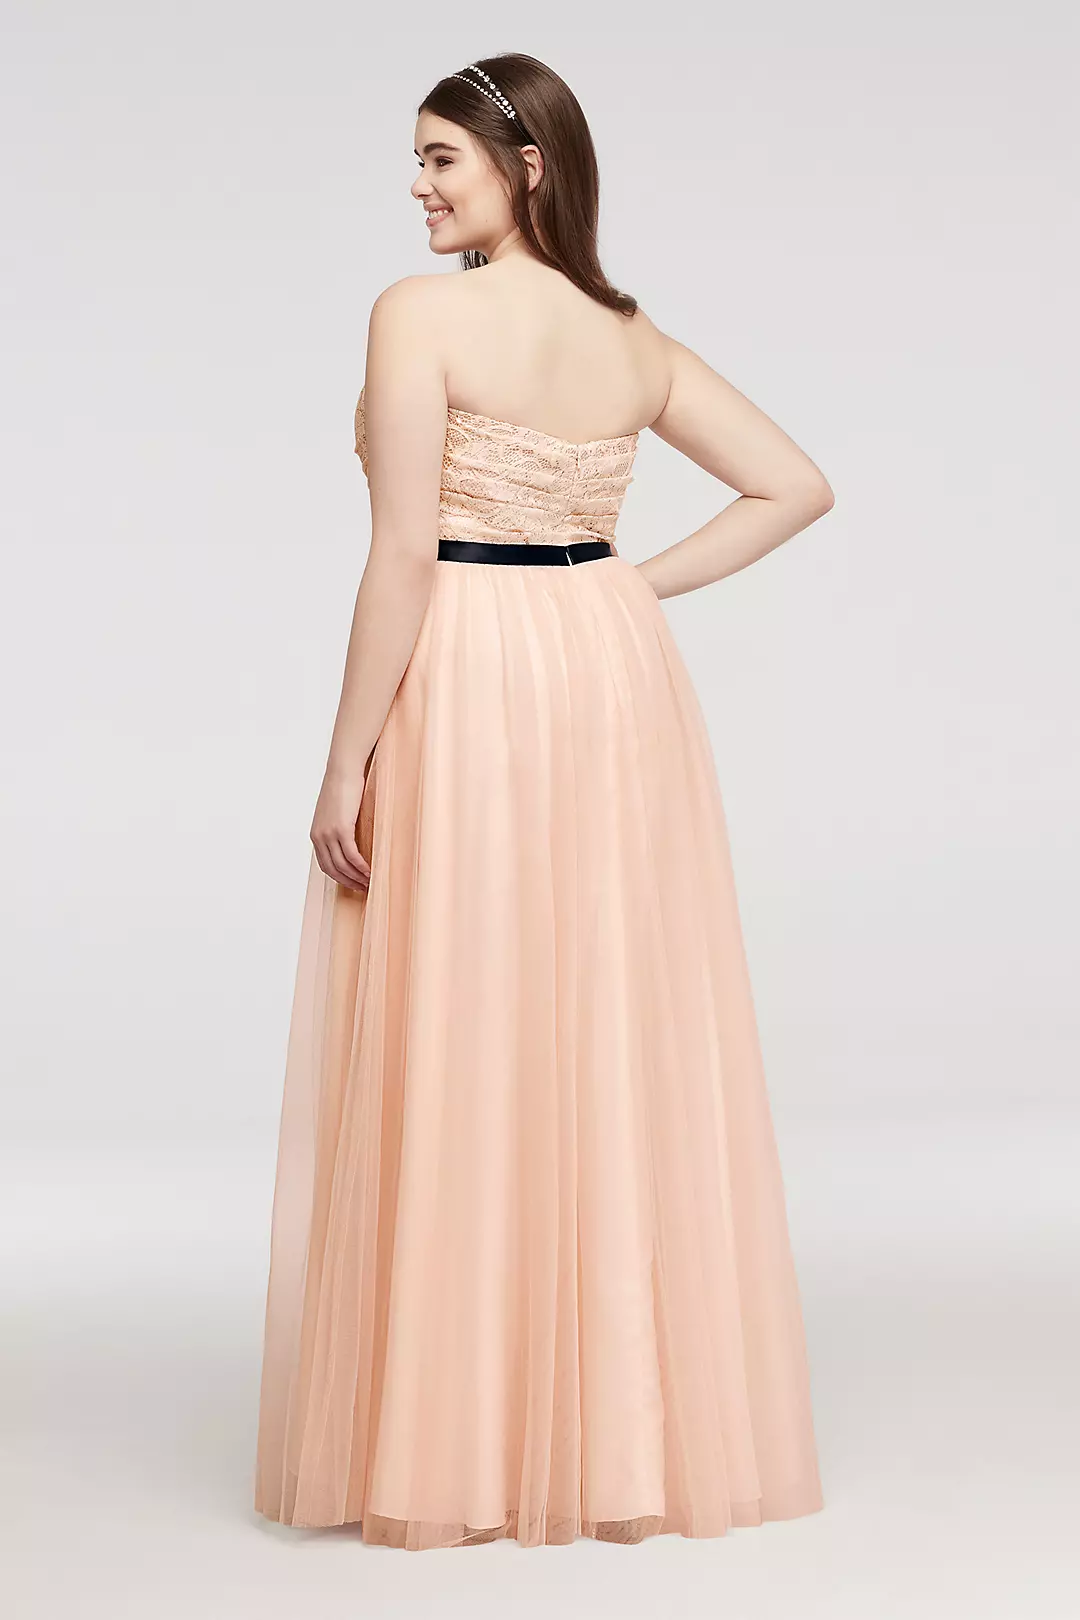 Strapless Tulle Prom Dress with Sash Image 2